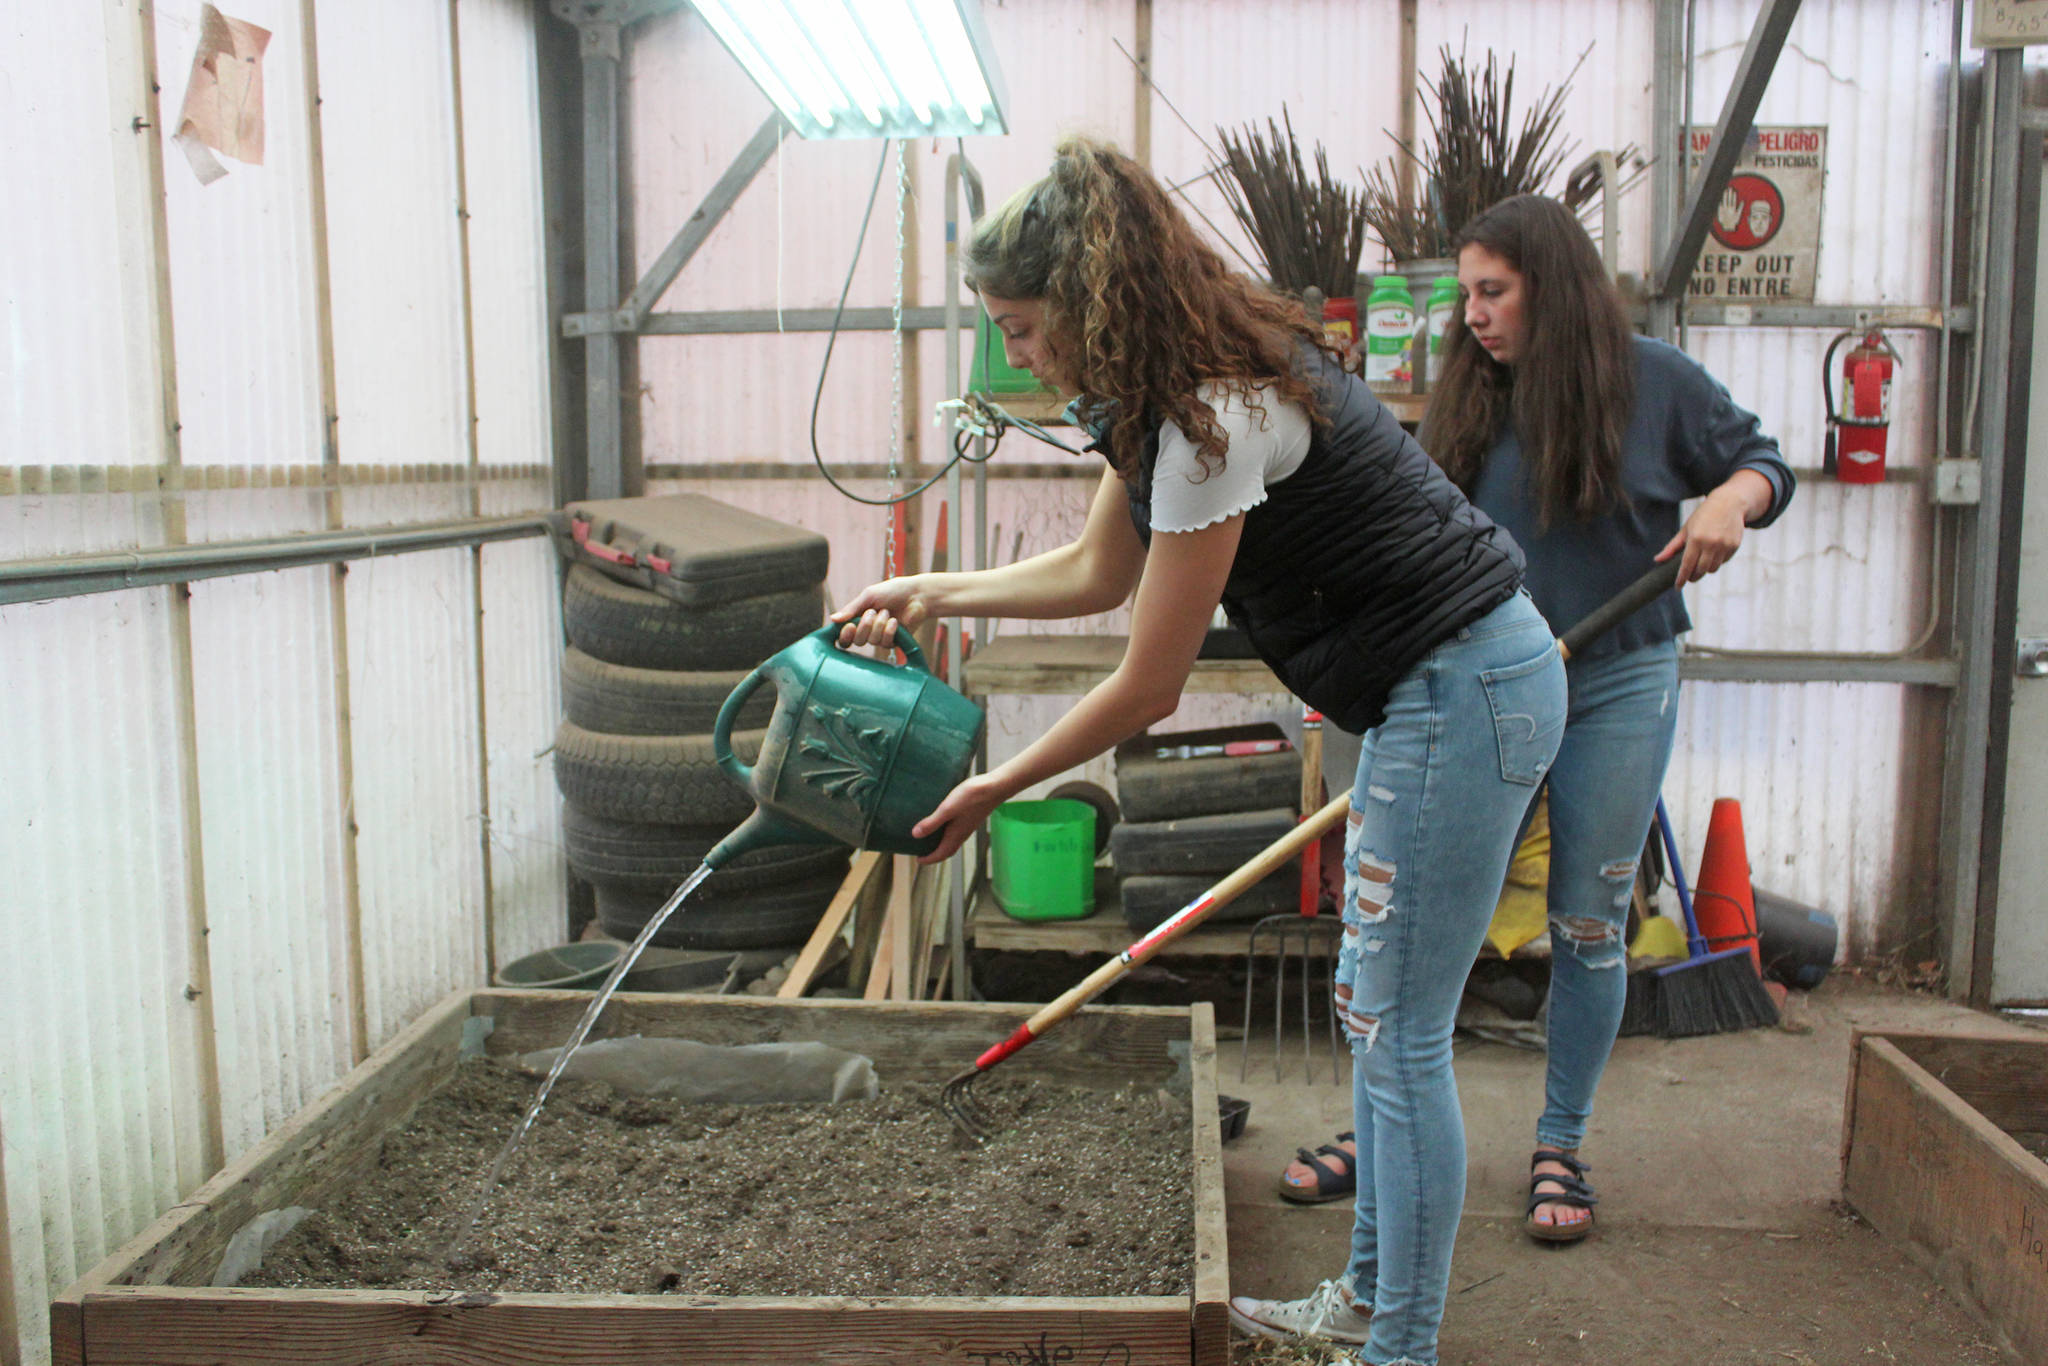 Madison Story (foreground) and Hannah Hatfield (background) till and wet a garden bed to prepare the dirt for planting during their natural resource technology class Friday, Aug. 30, 2019 at Homer High School in Homer, Alaska. (Photo by Megan Pacer/Homer News)